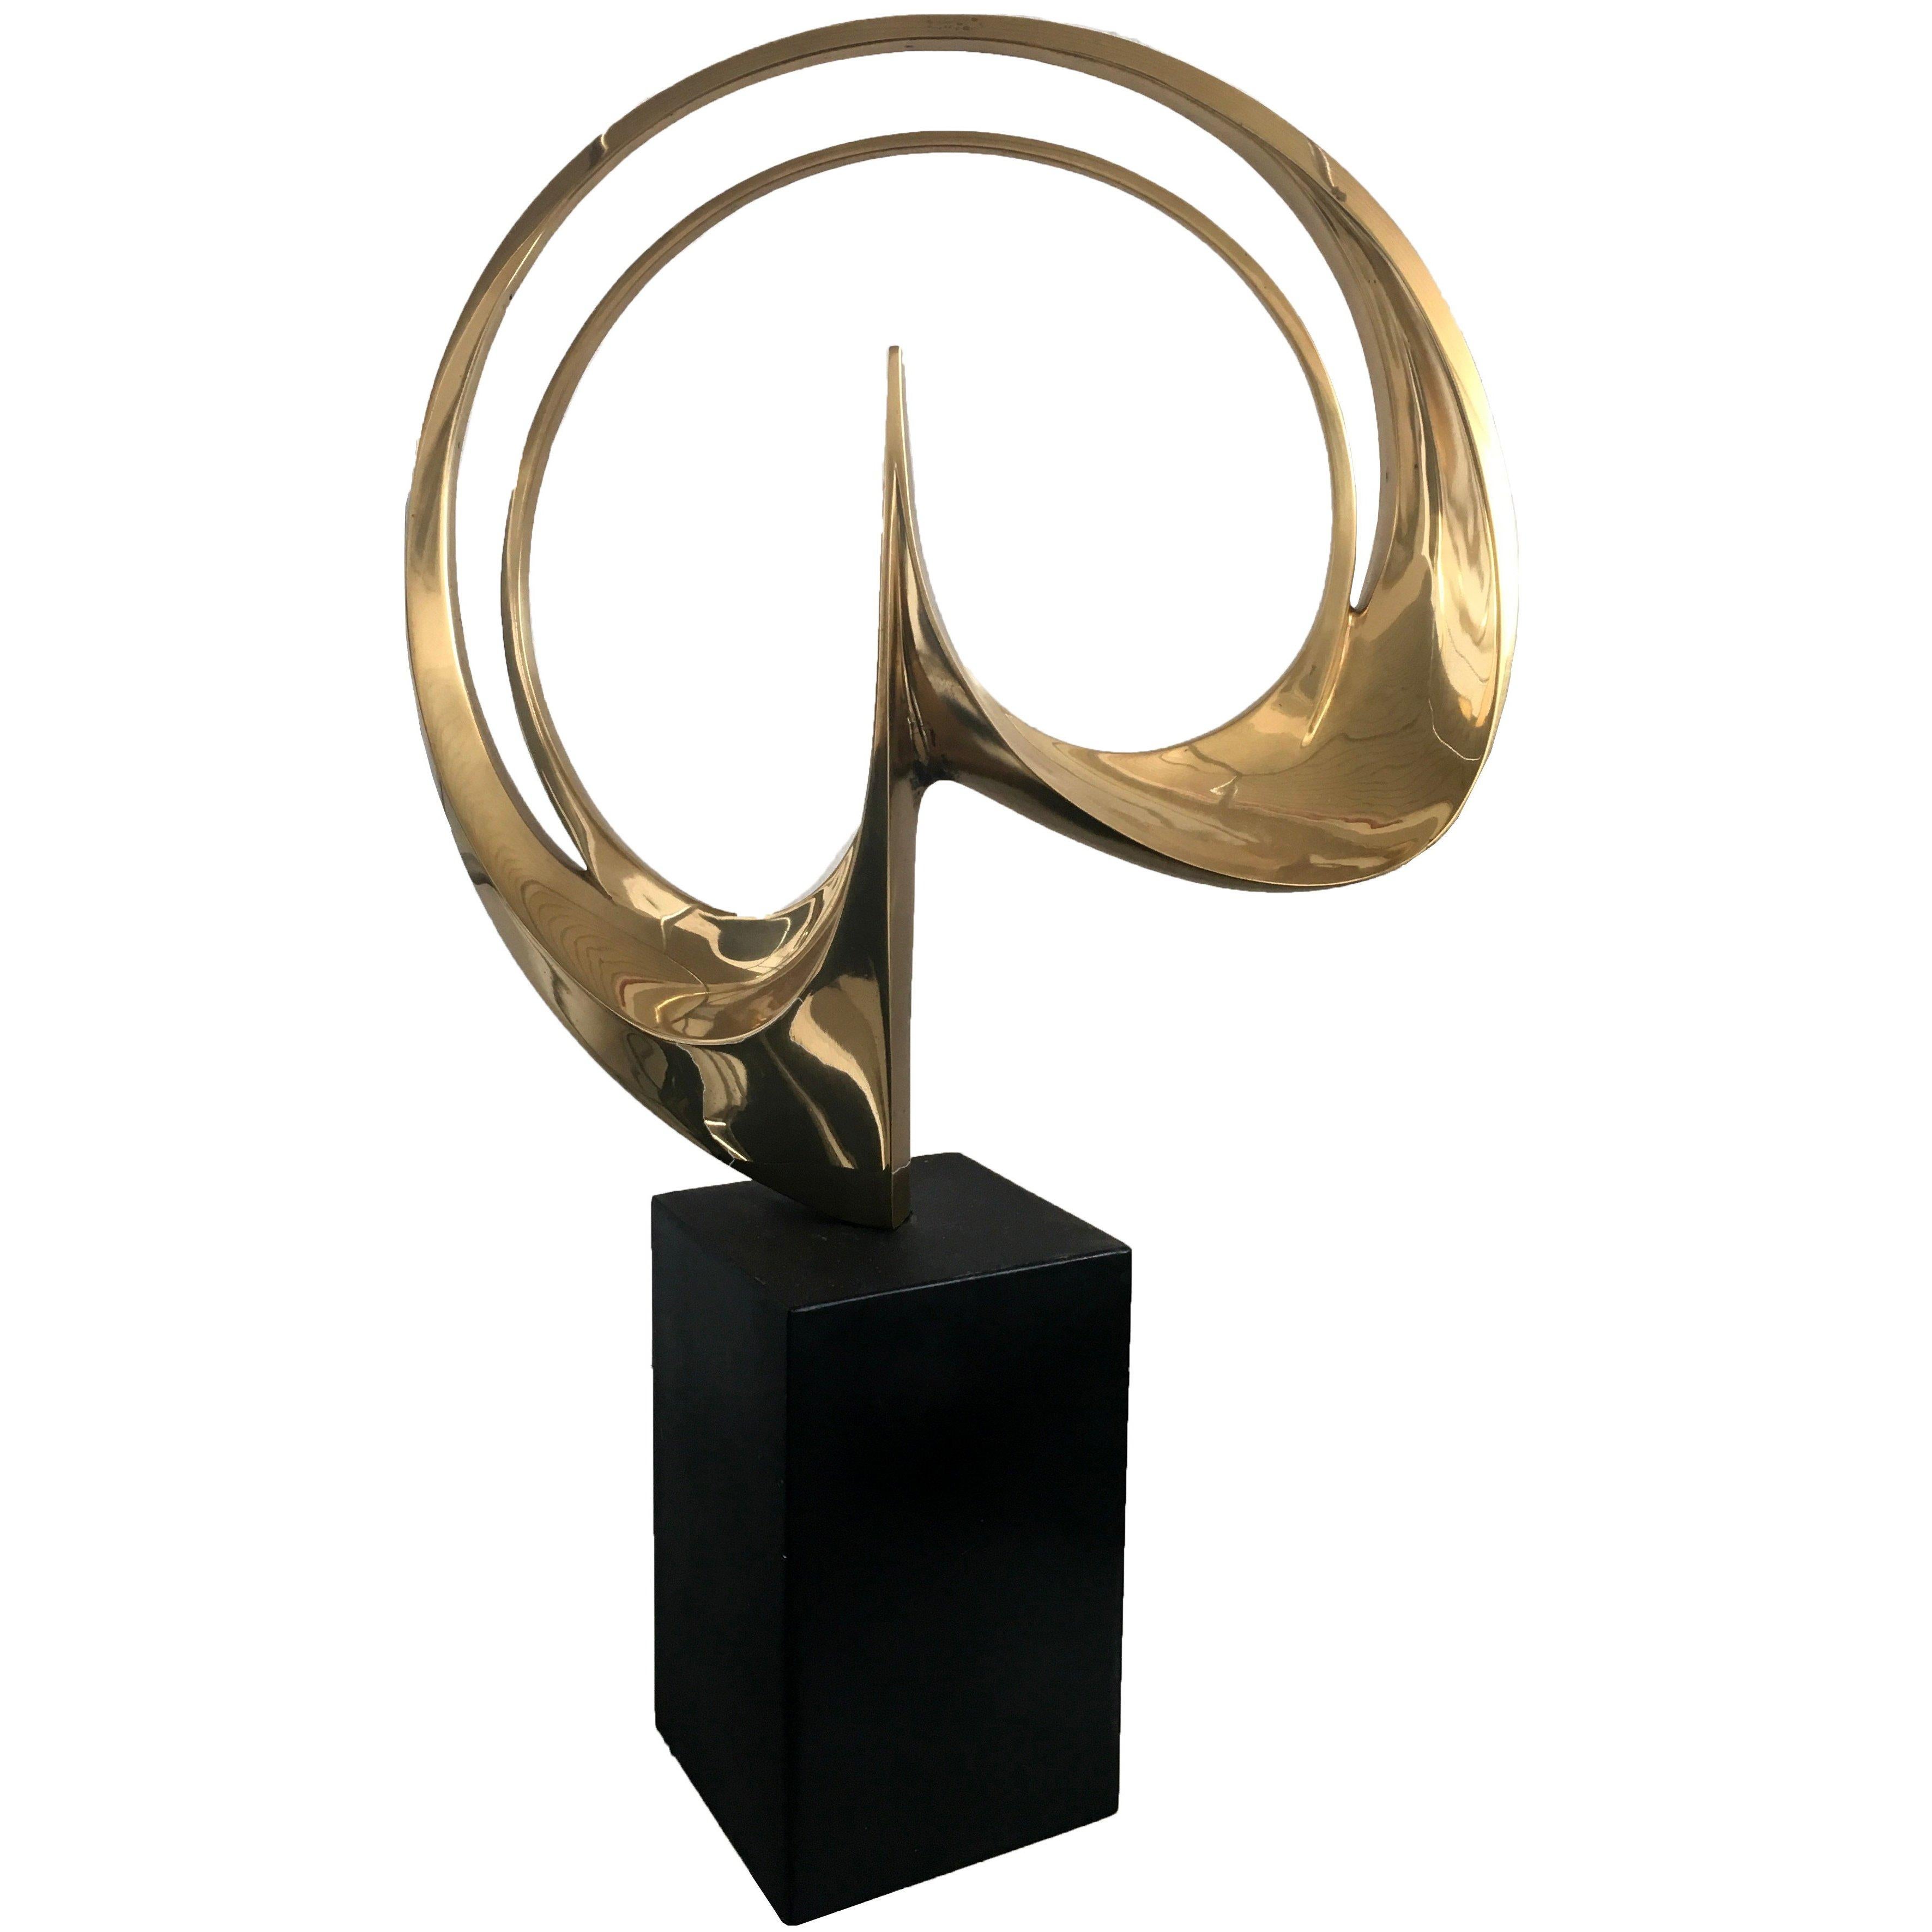 This Carmelo Cappello Abstract Sculpture is a very interesting example of the approach of the artist to the Universe.
In his mind he considered the Universe a not perfect circle but an irregular cosmic shape that can be observed from many point of